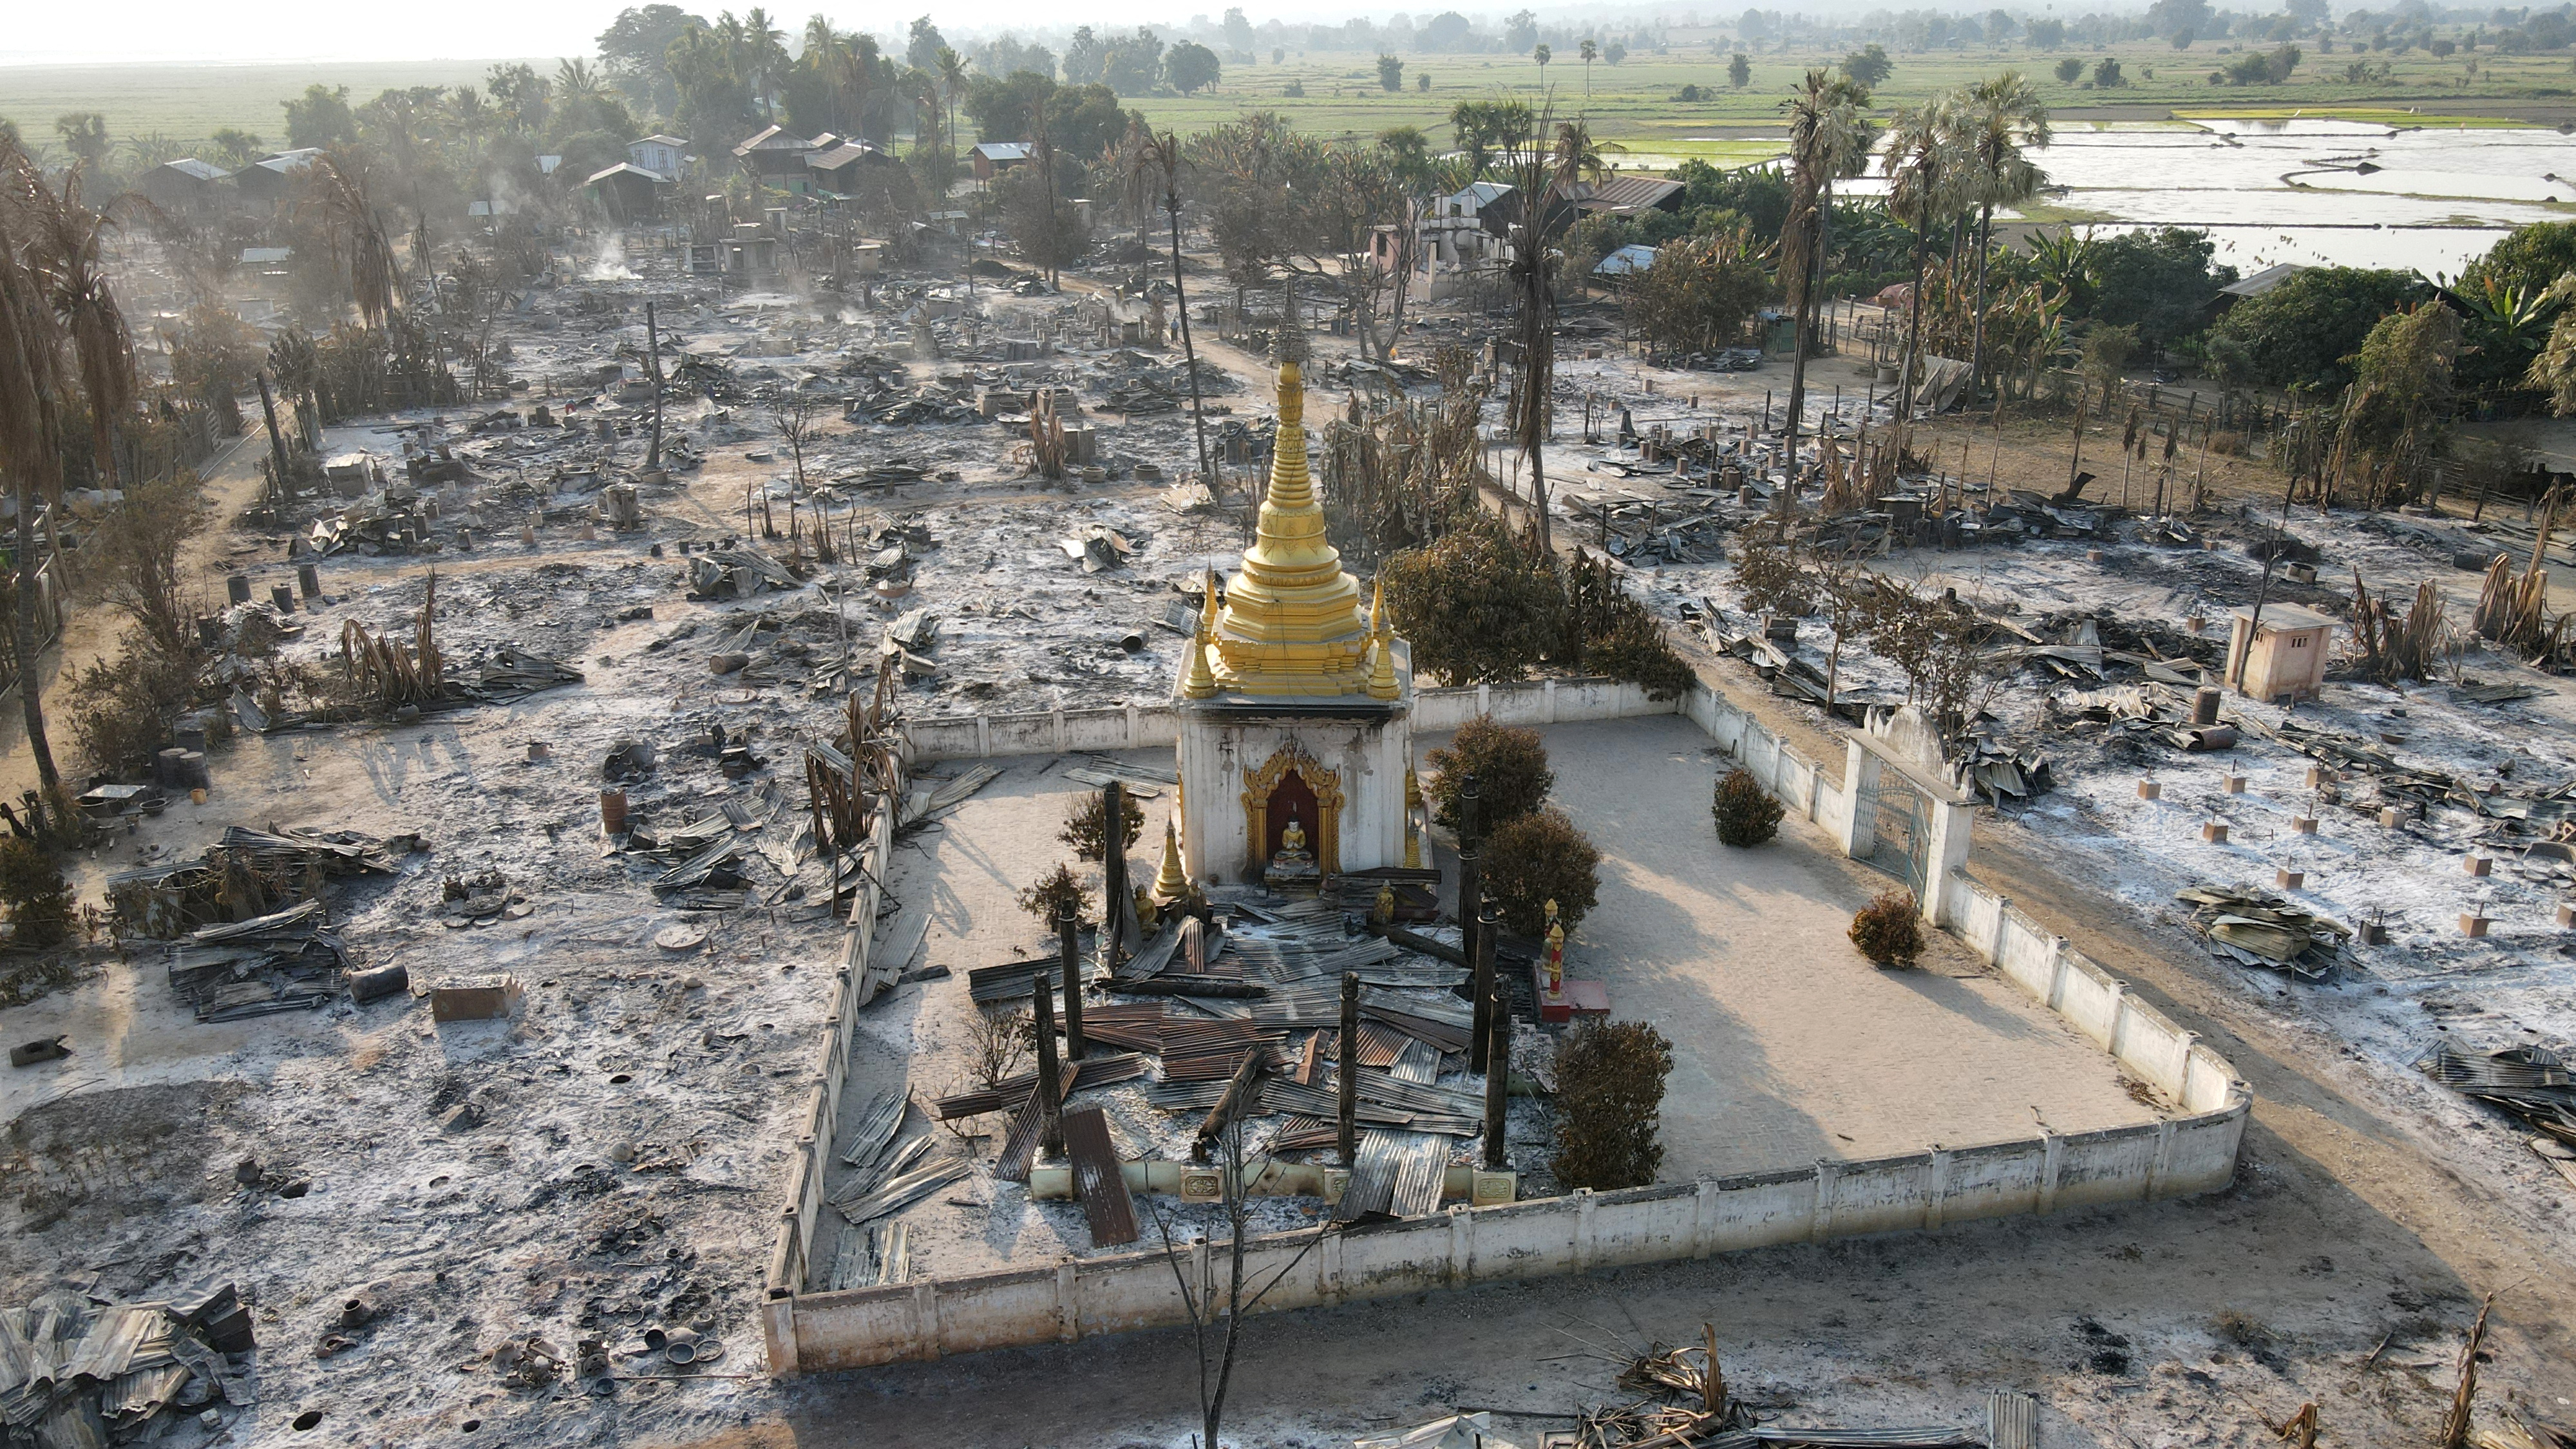 An aerial view of Bin village of the Mingin Township in Sagaing region after villagers say it was set ablaze by the Myanmar military